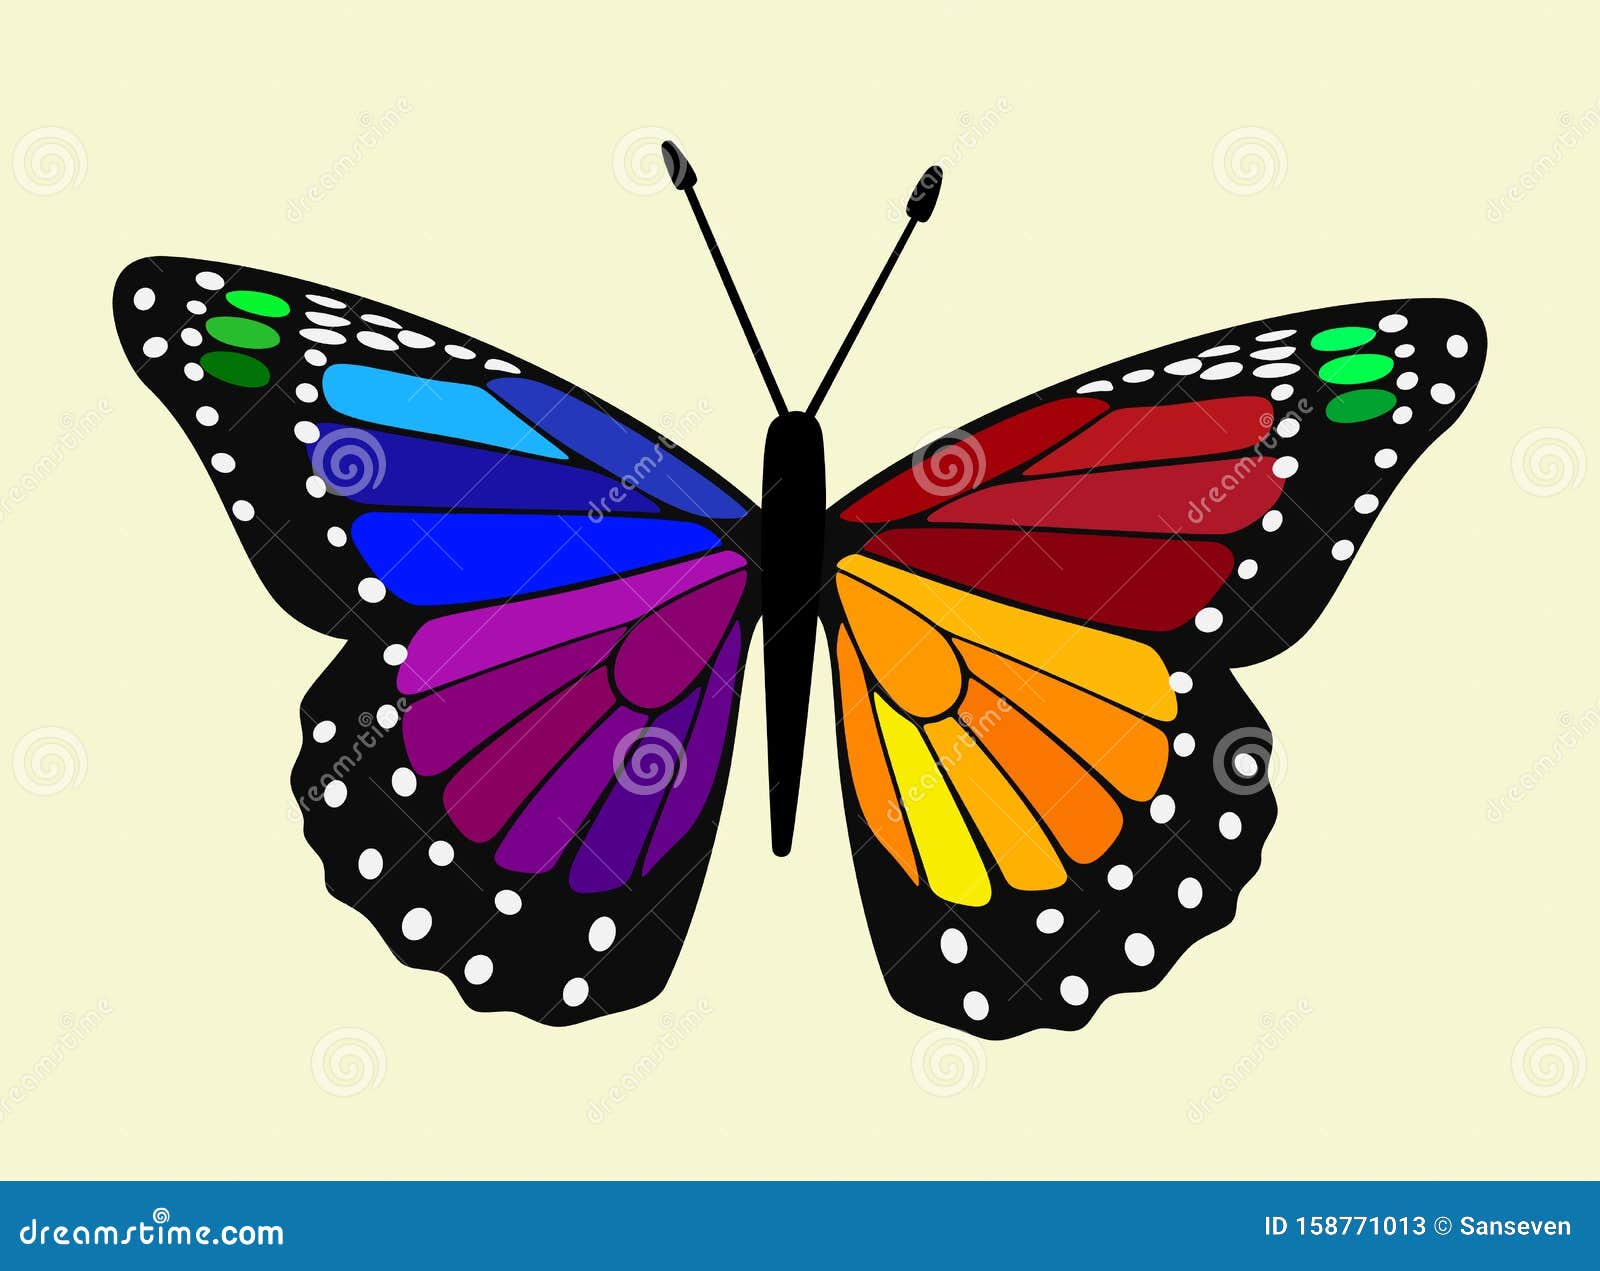 Colorful Butterfly Vector Background - Digital Illustration Stock  Illustration - Illustration of black, clipart: 158771013